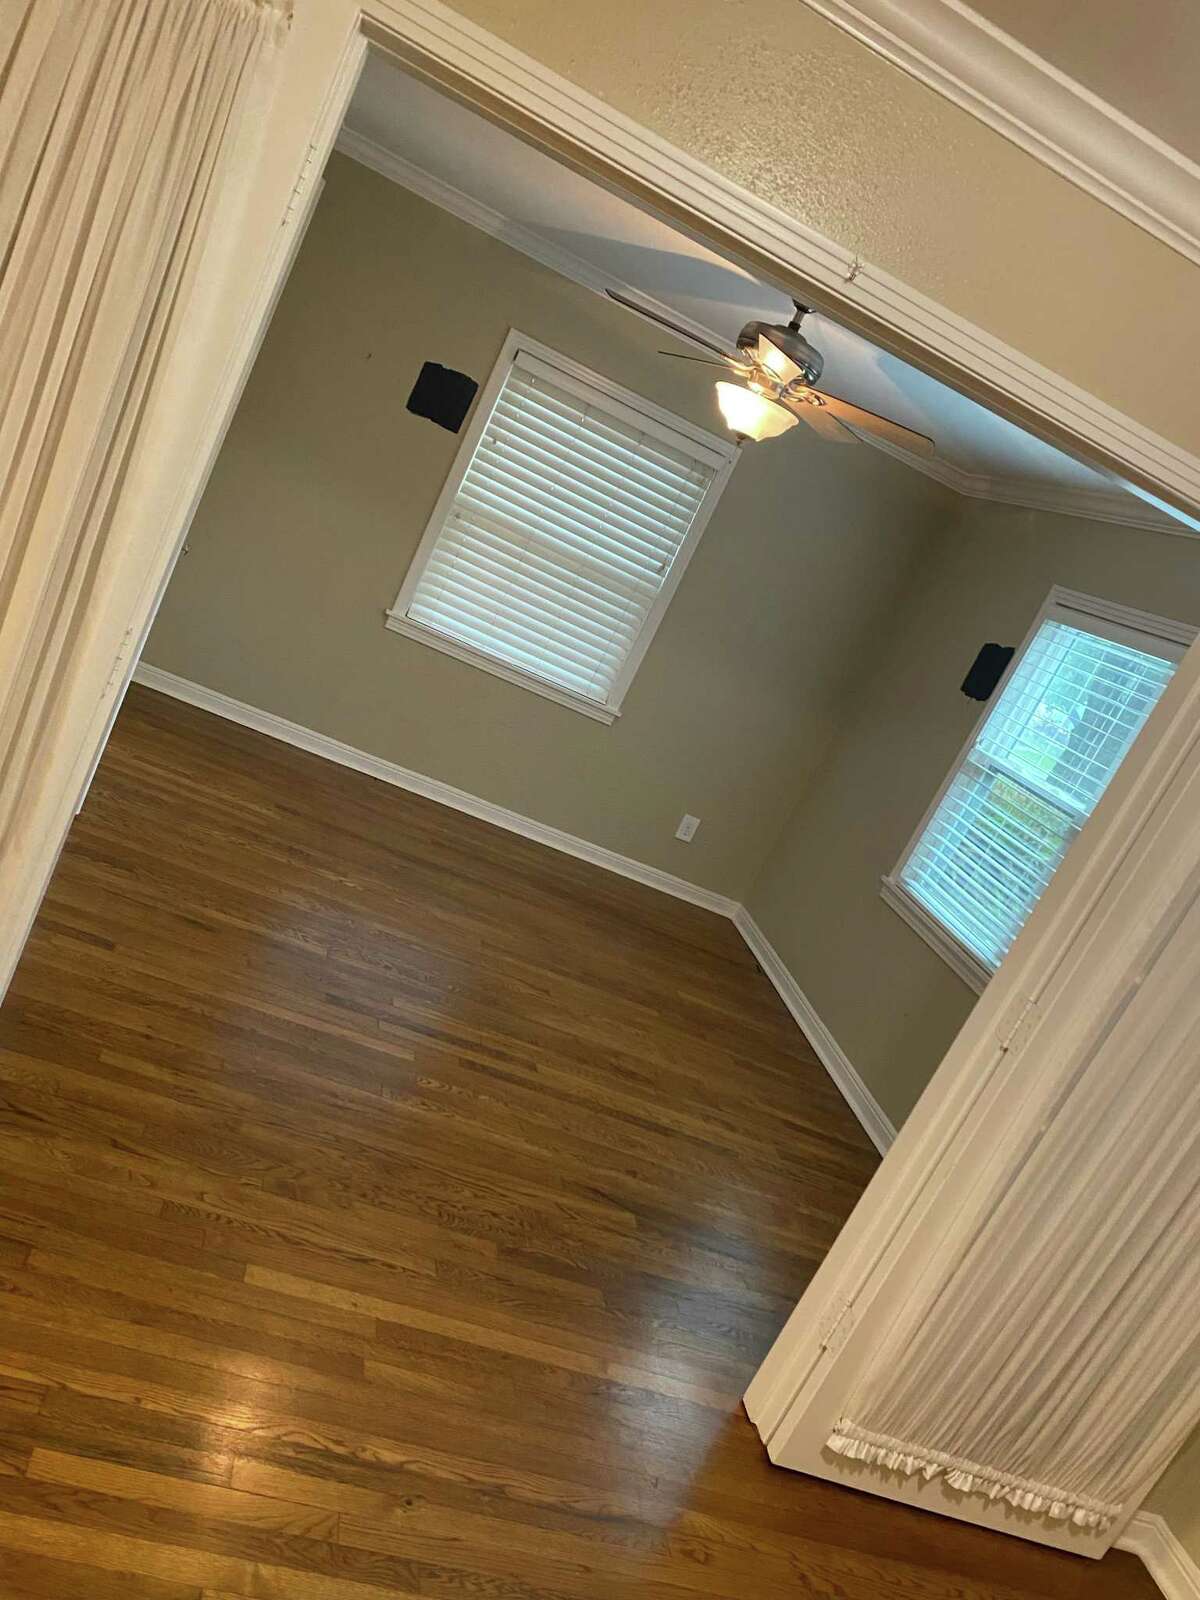 This before photo shows the empty bedroom that was turned into a dining room. The interior wall and doors were removed to open it to the rest of the house.